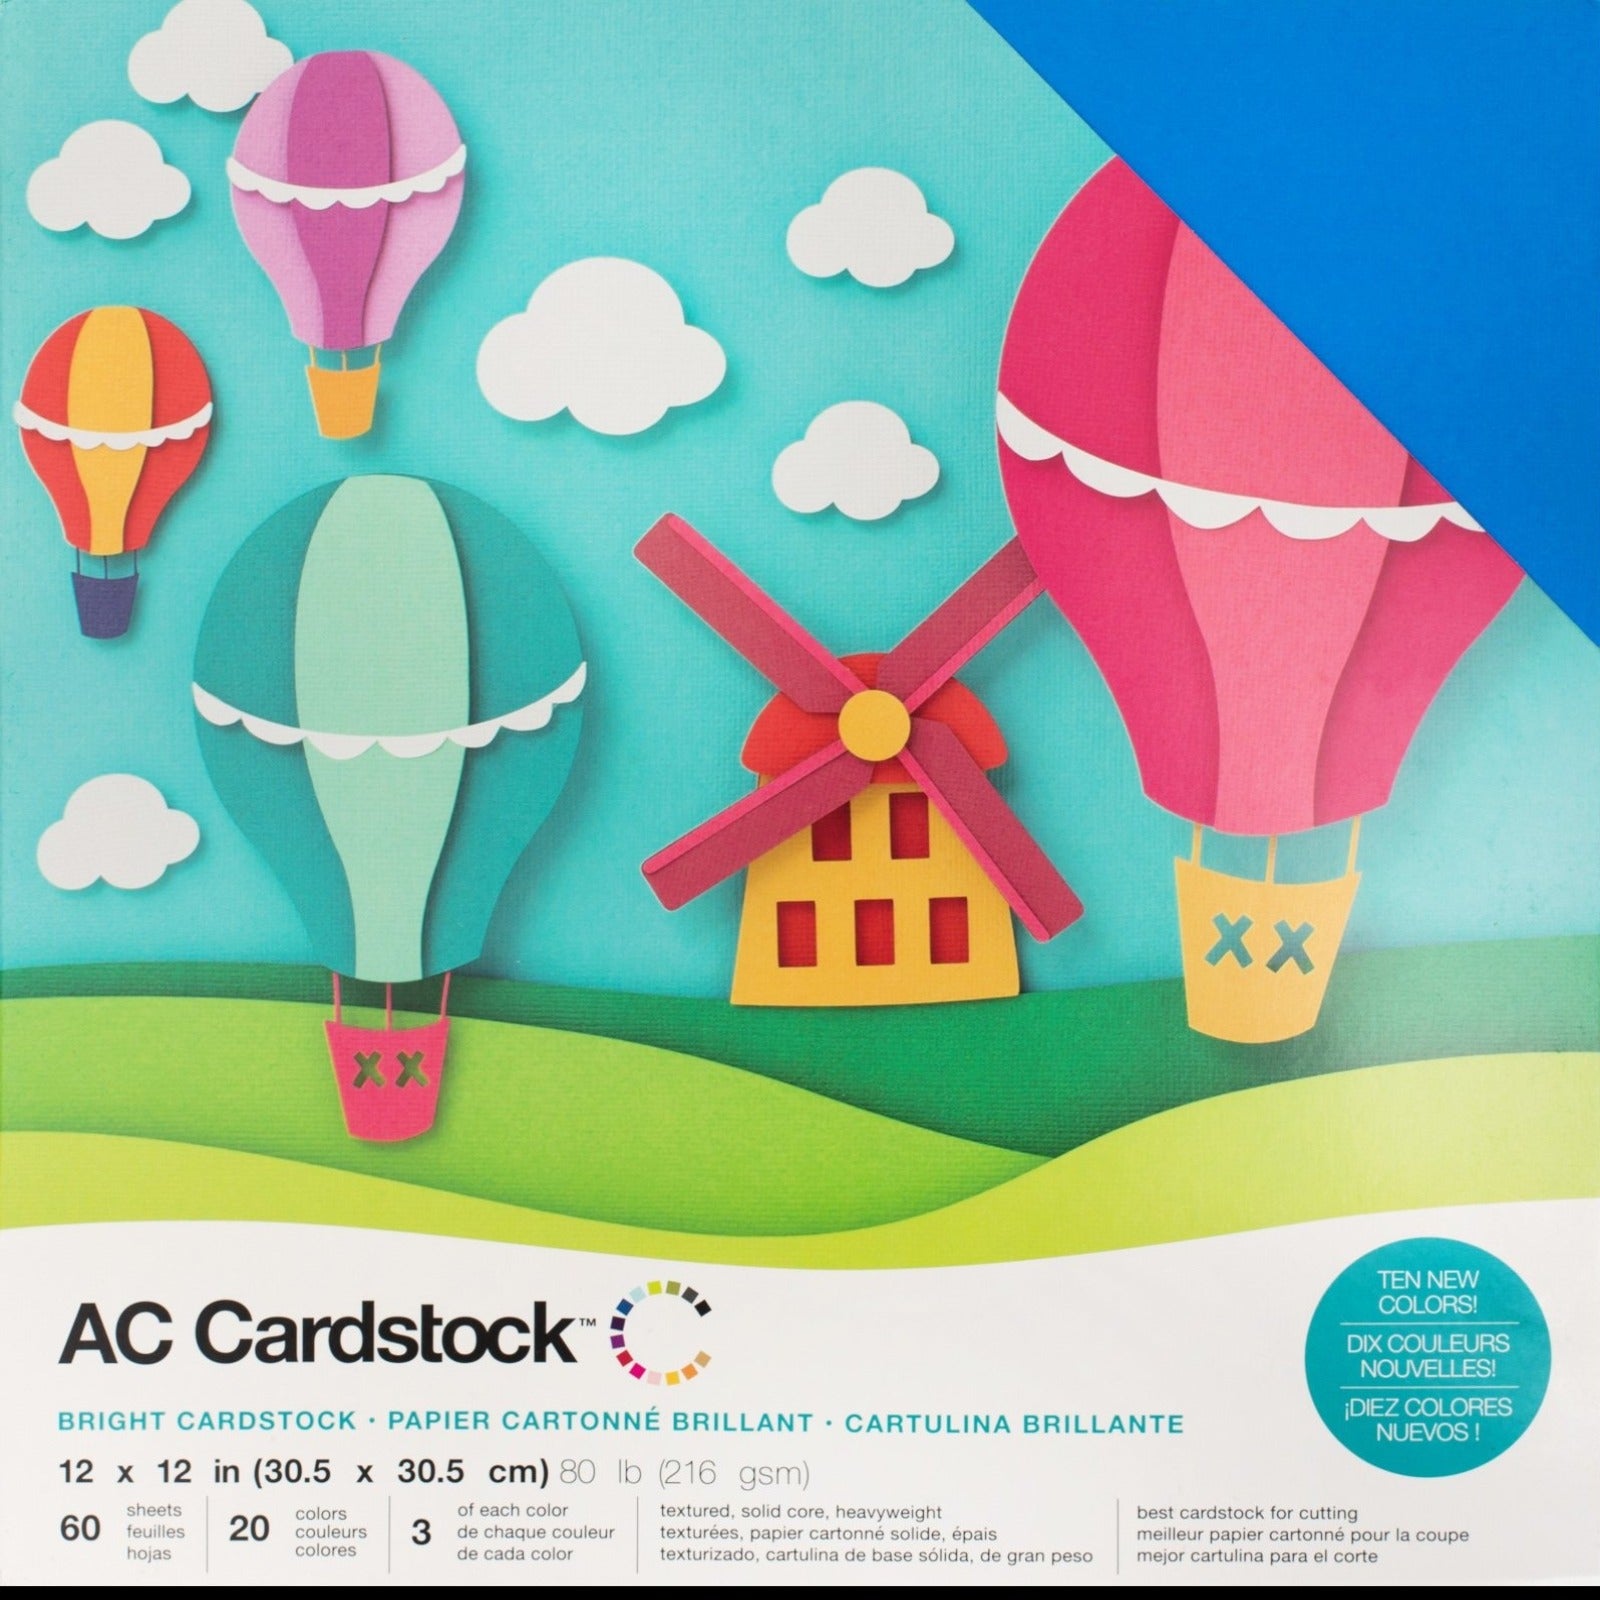 Printworks Bright Cardstock 65 lb 4 Assorted Bright Colors FSC Certified  Perfect for School and Craft